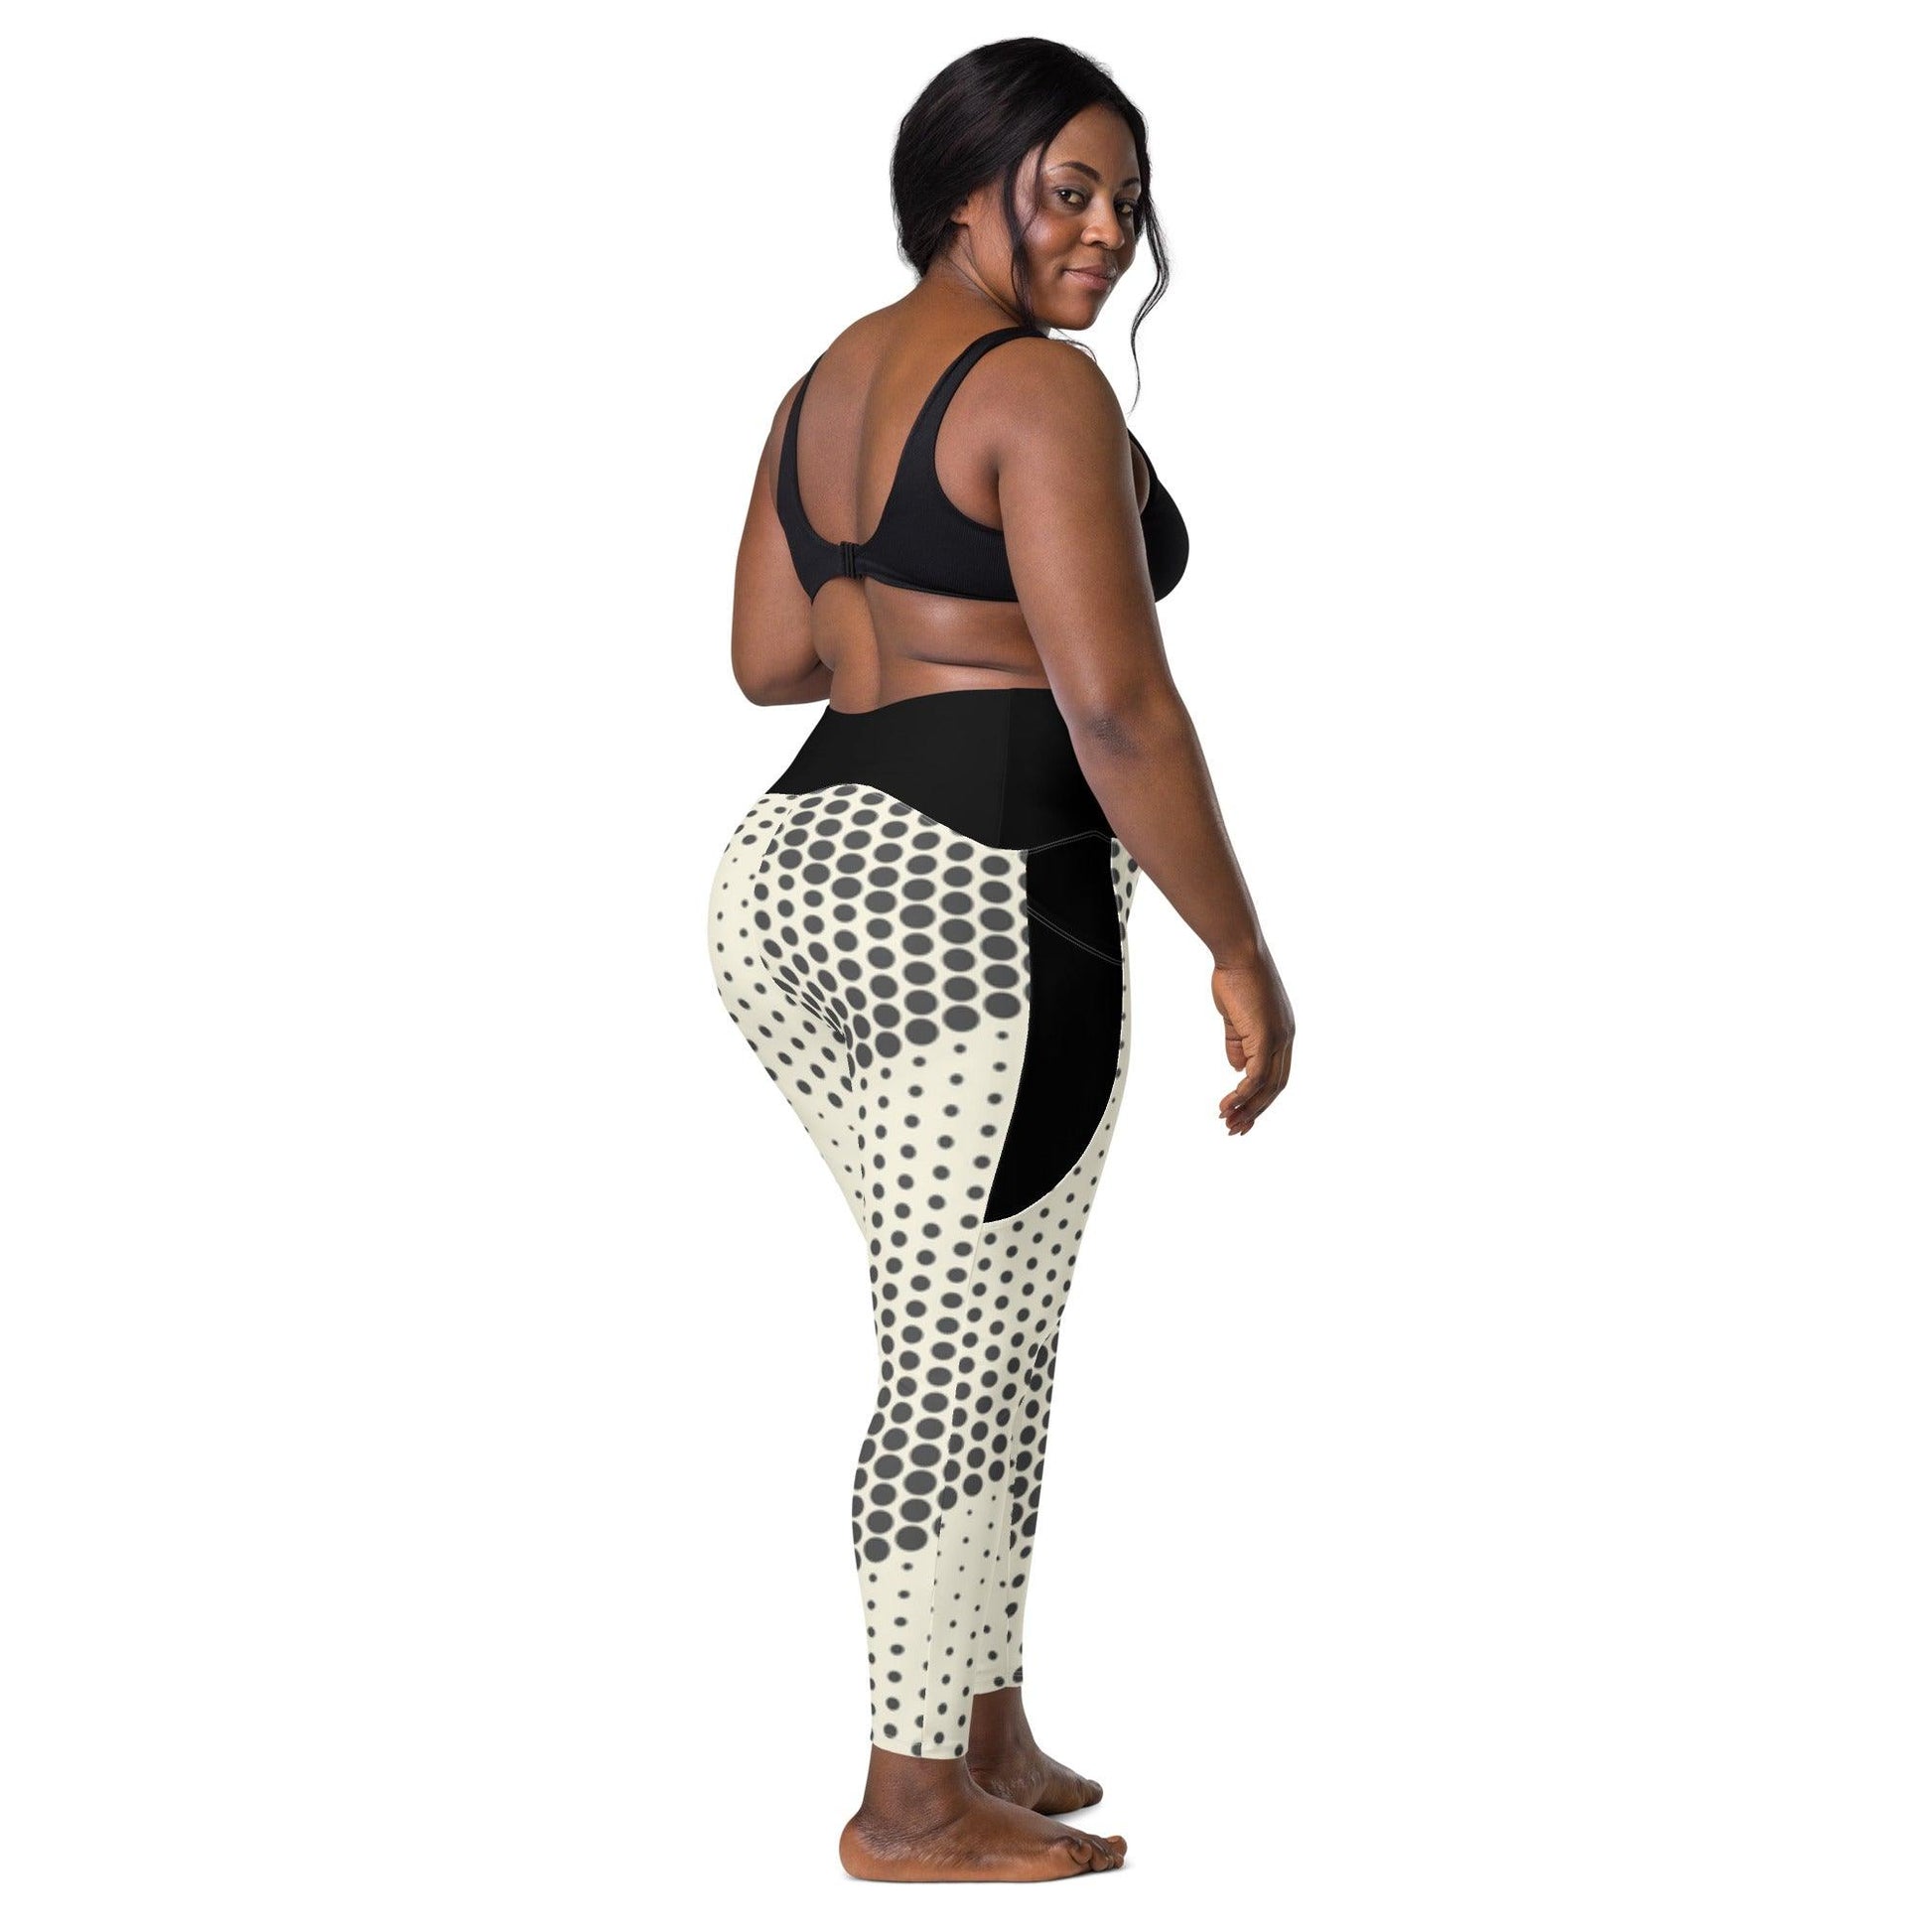 Checkers Leggings with Pockets - L & M Kee, LLC